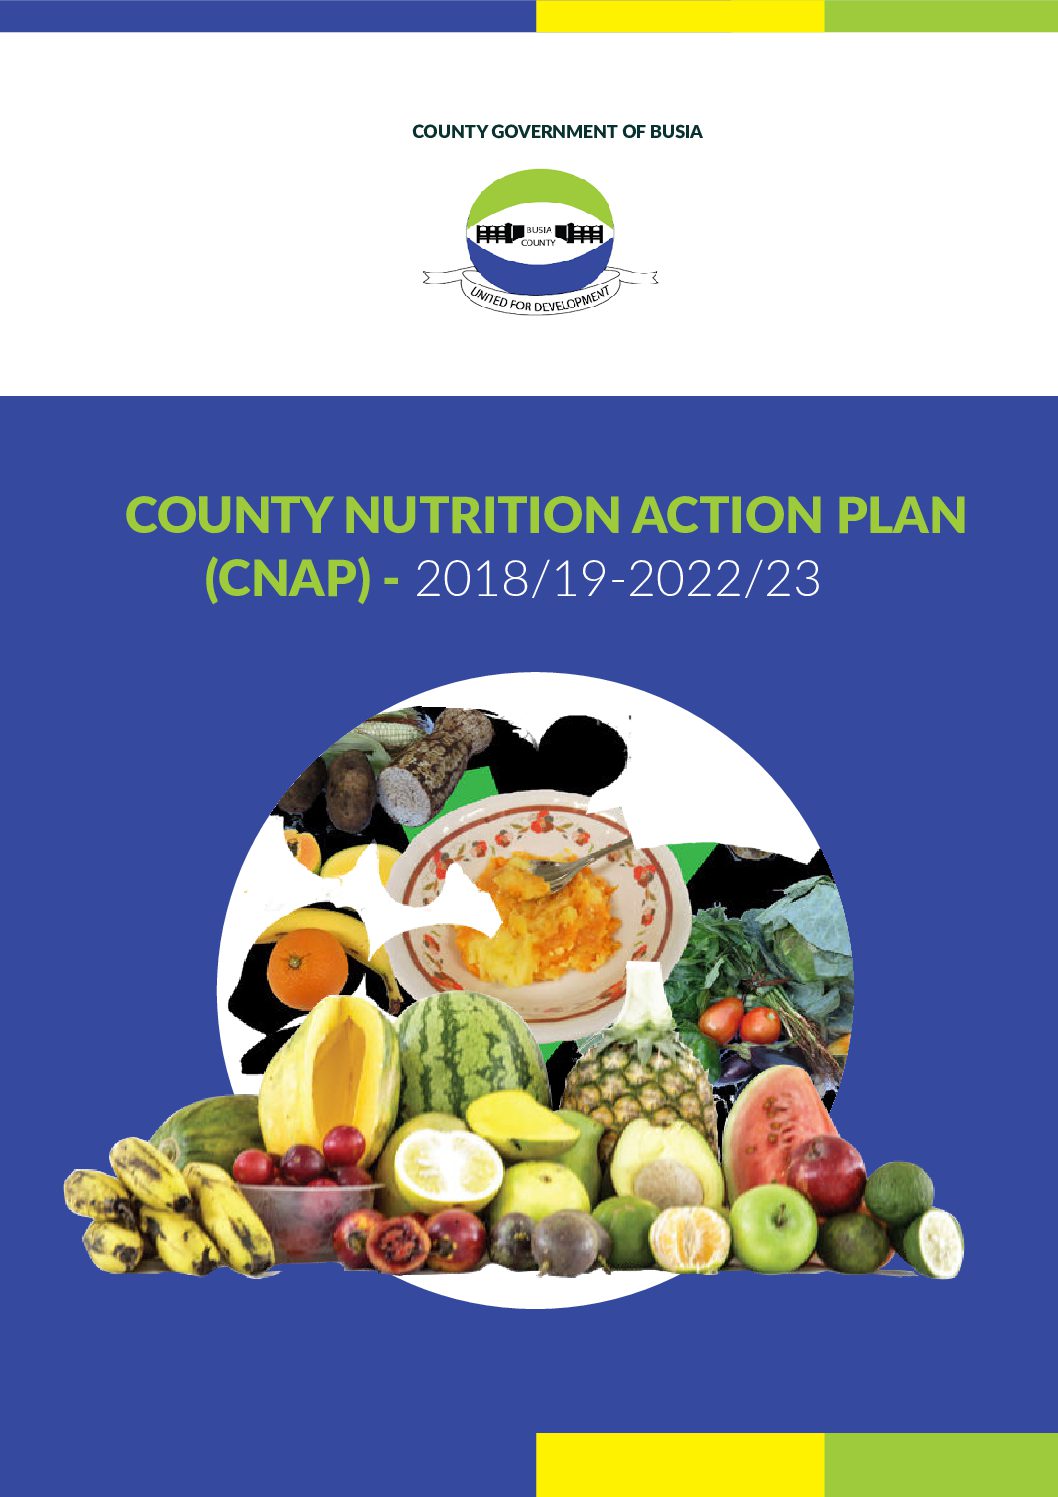 Busia County Nutrition Action Plan 2018/19 – 2022/23 thumbnail